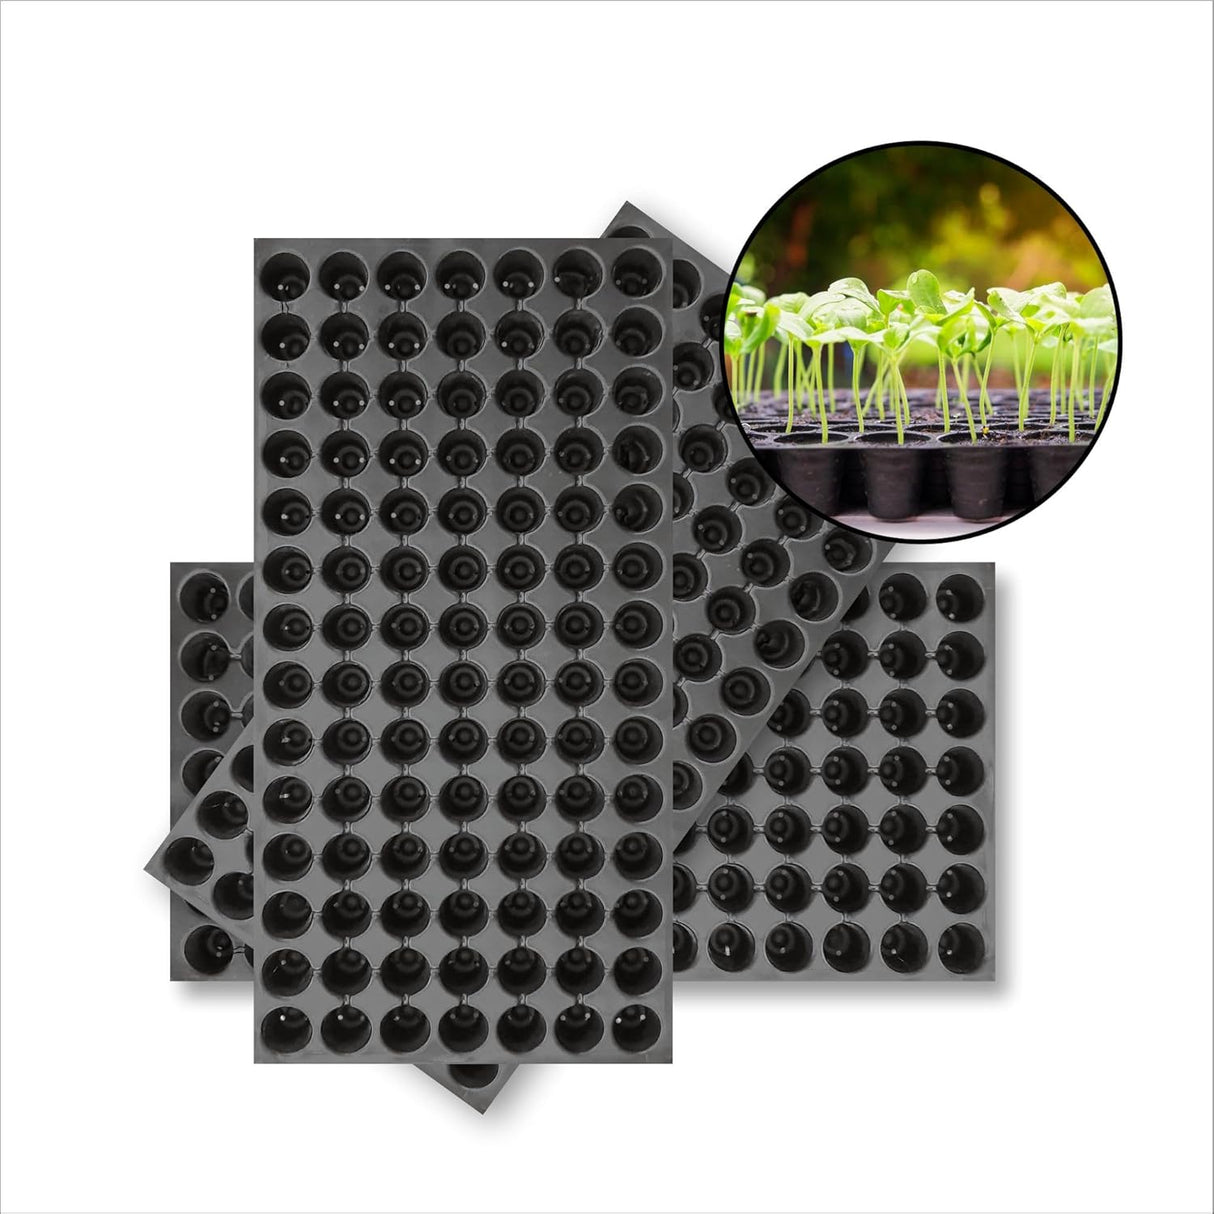 SINGHAL Seedling Tray - Pack of 10 (Black, 98 Holes) Germination Trays for Seedling, Nursery Trays for Plants, Reusable Plastic Trays for Garden Plantation, 98 Cavities Tray for Seeding